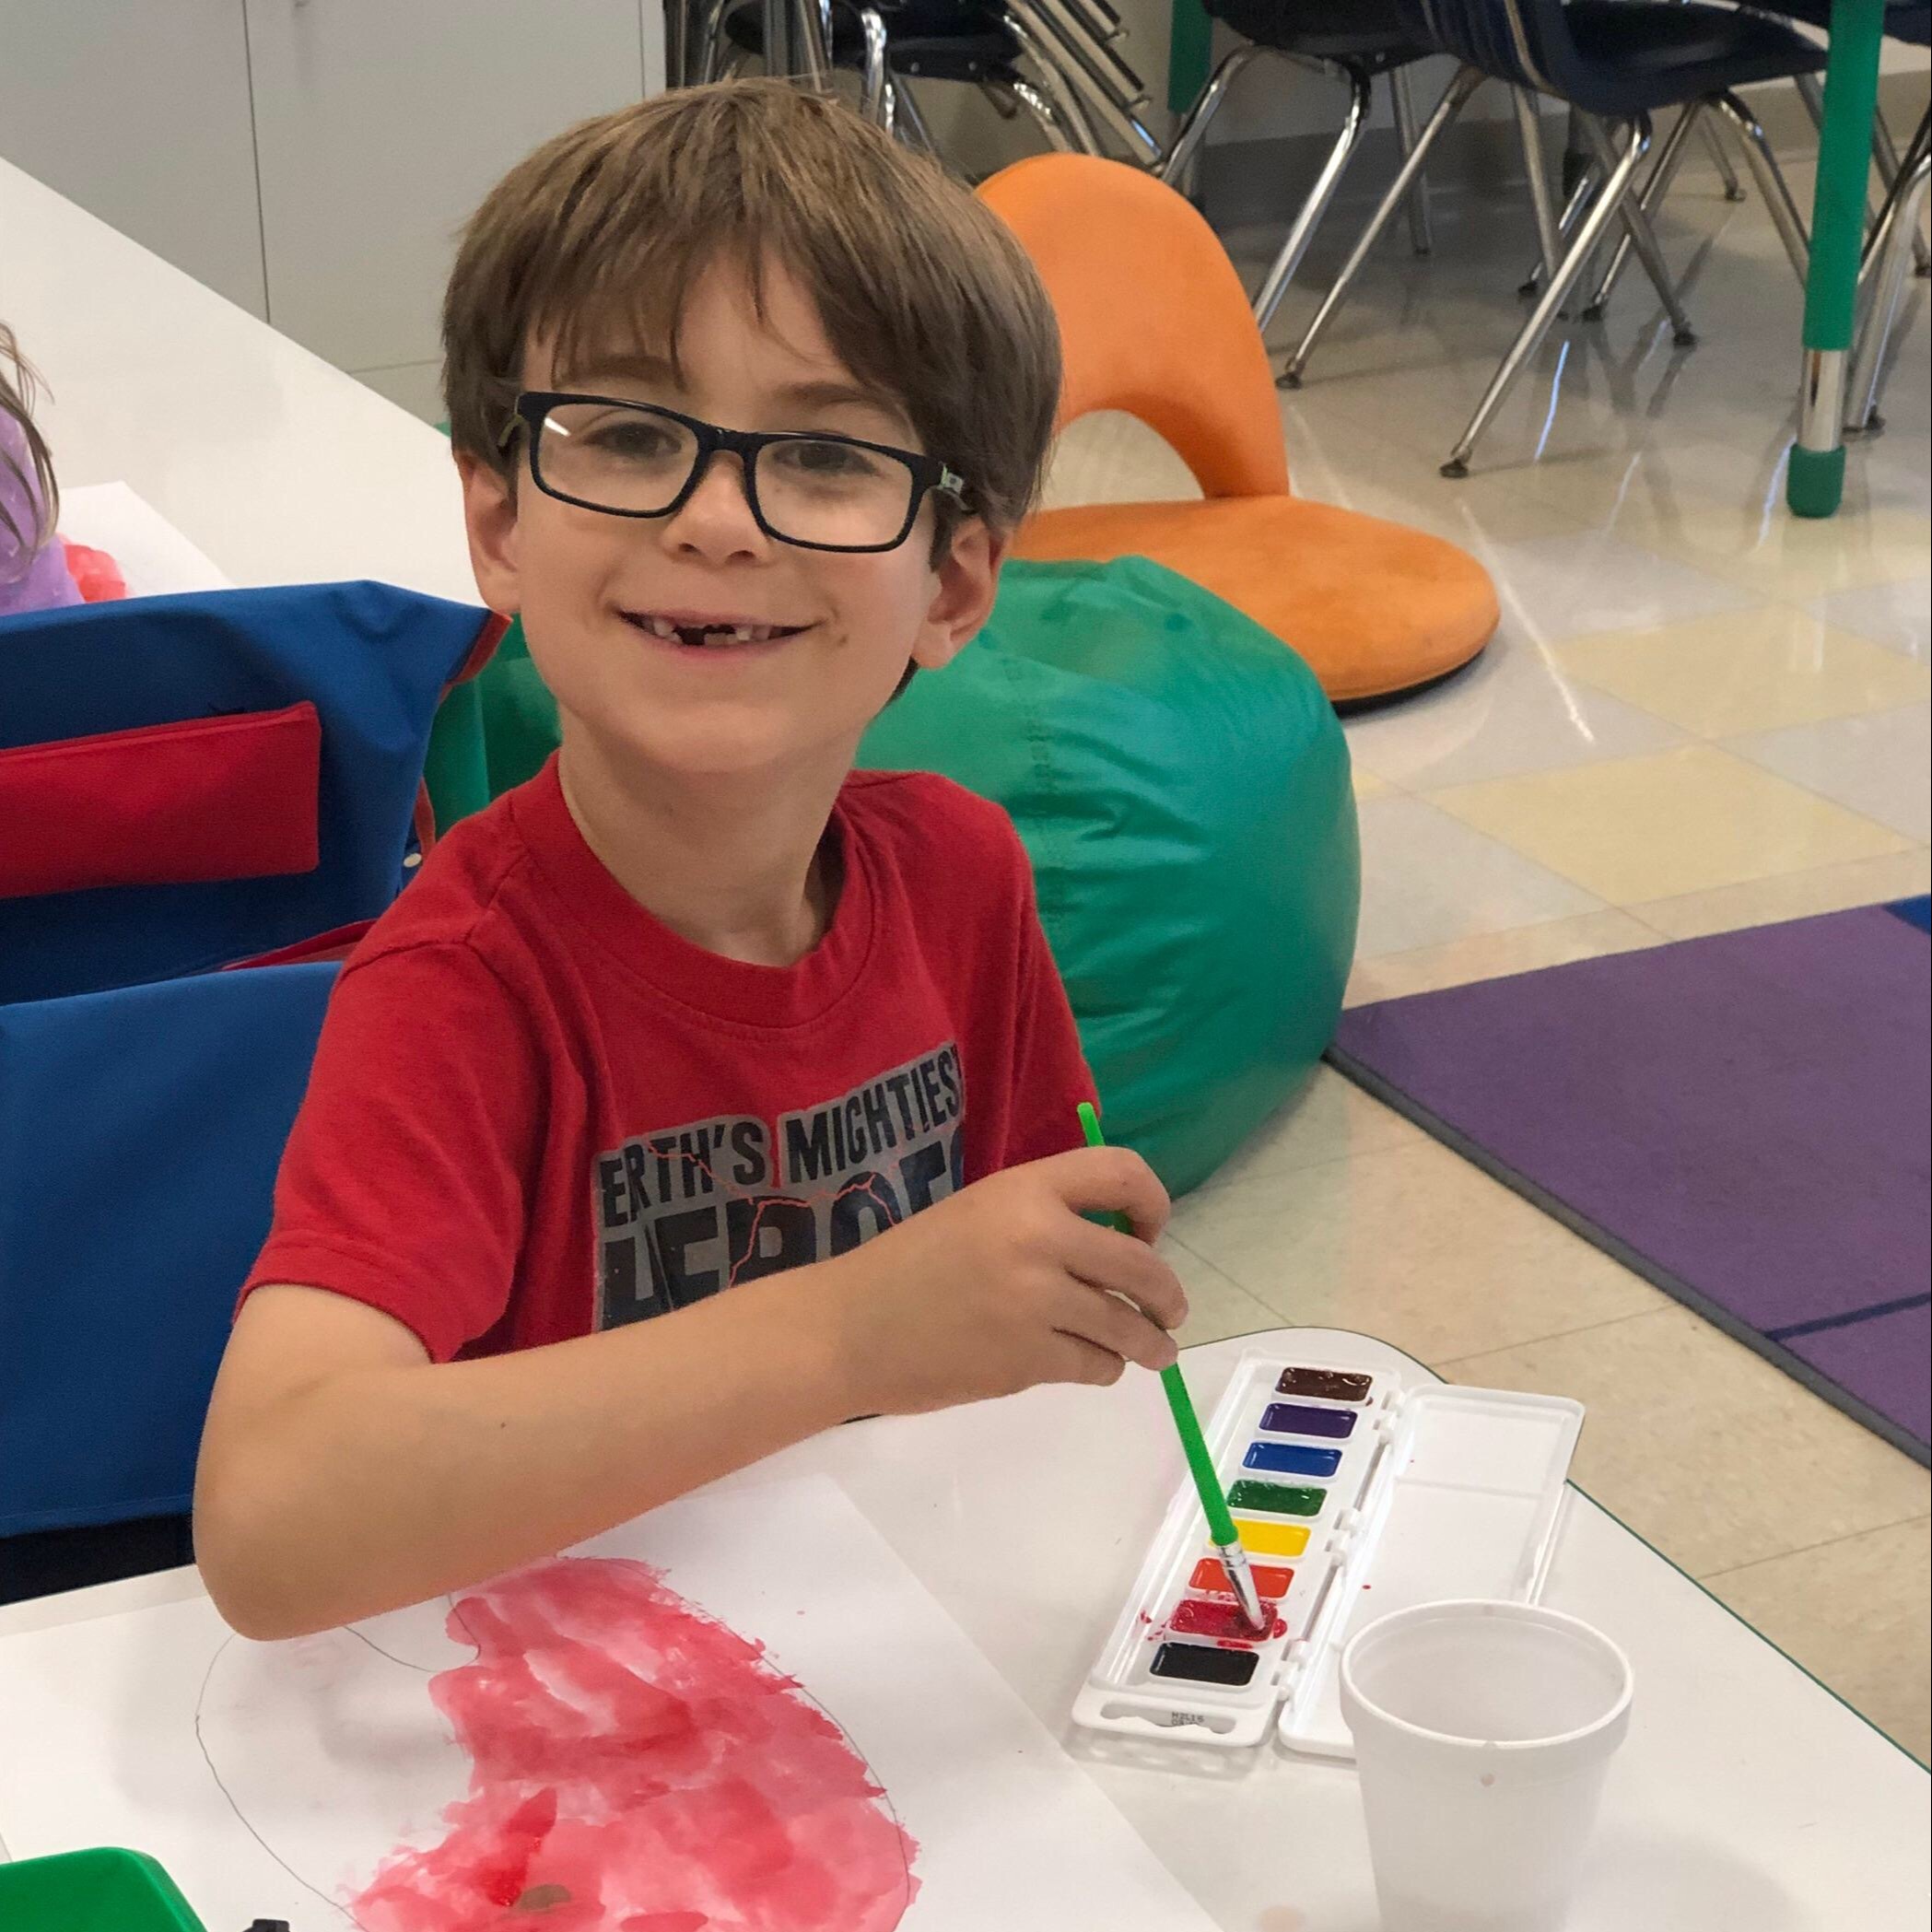 Student smiles while painting